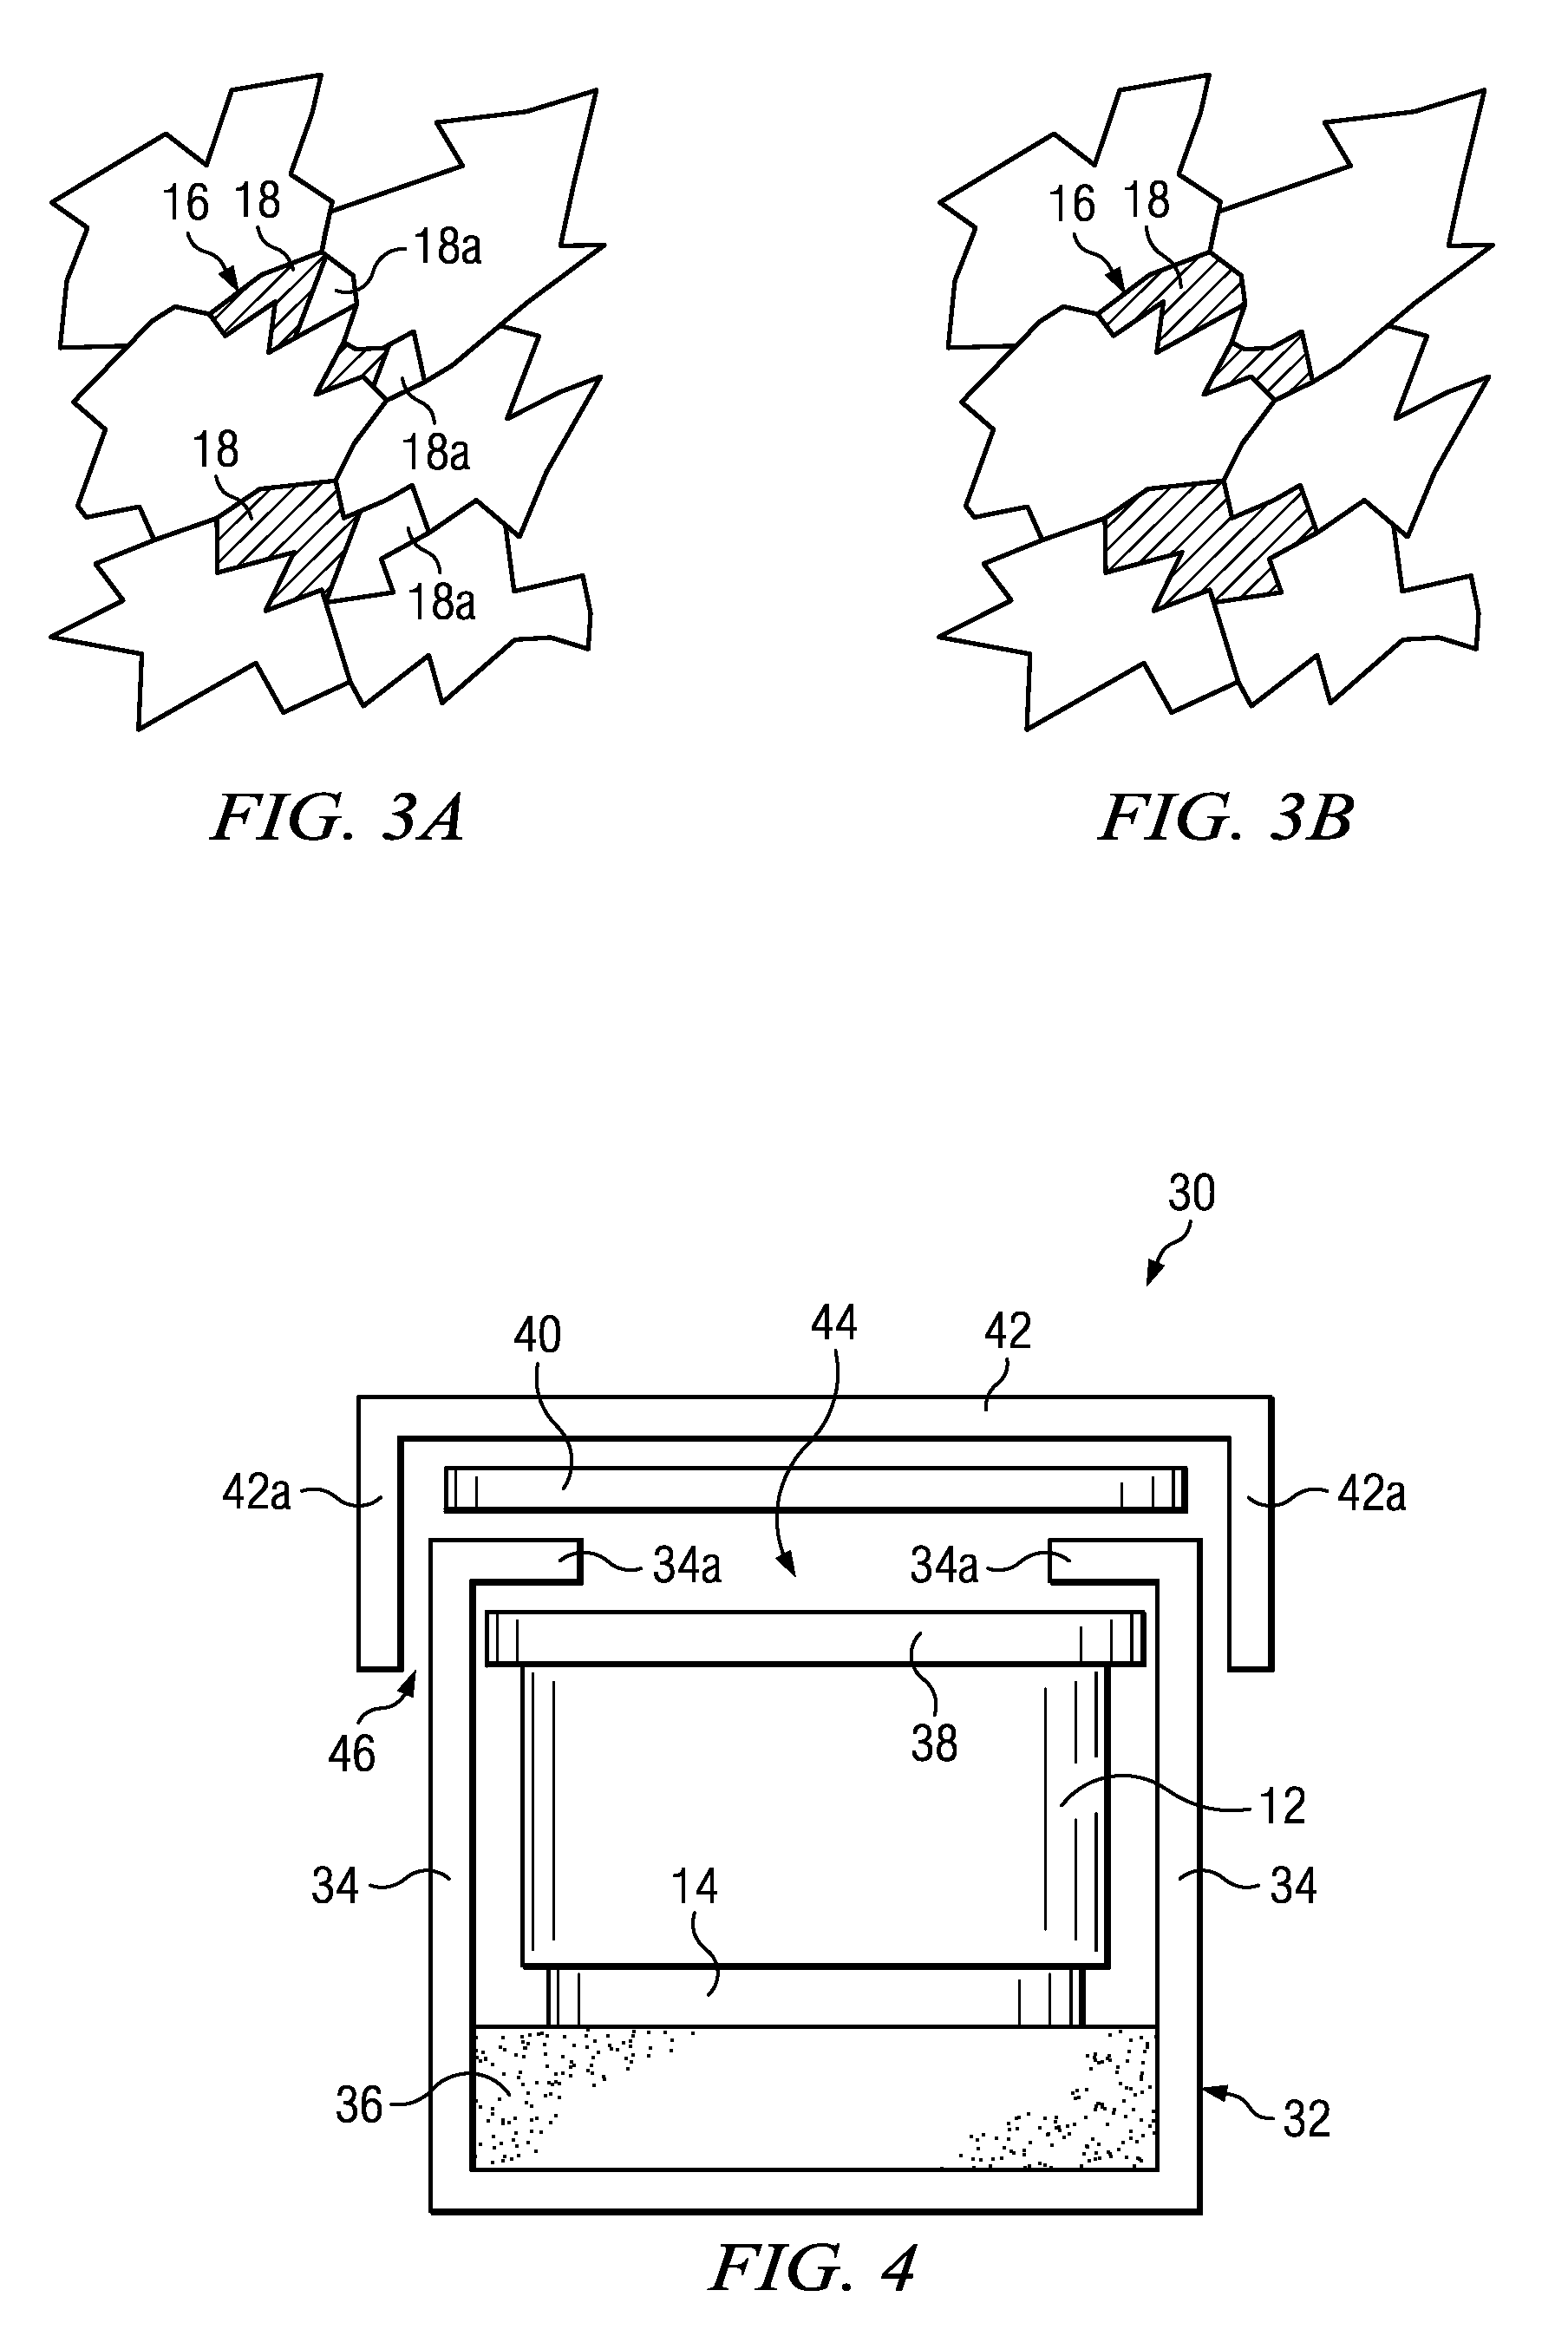 Method of forming a thermally stable diamond cutting element